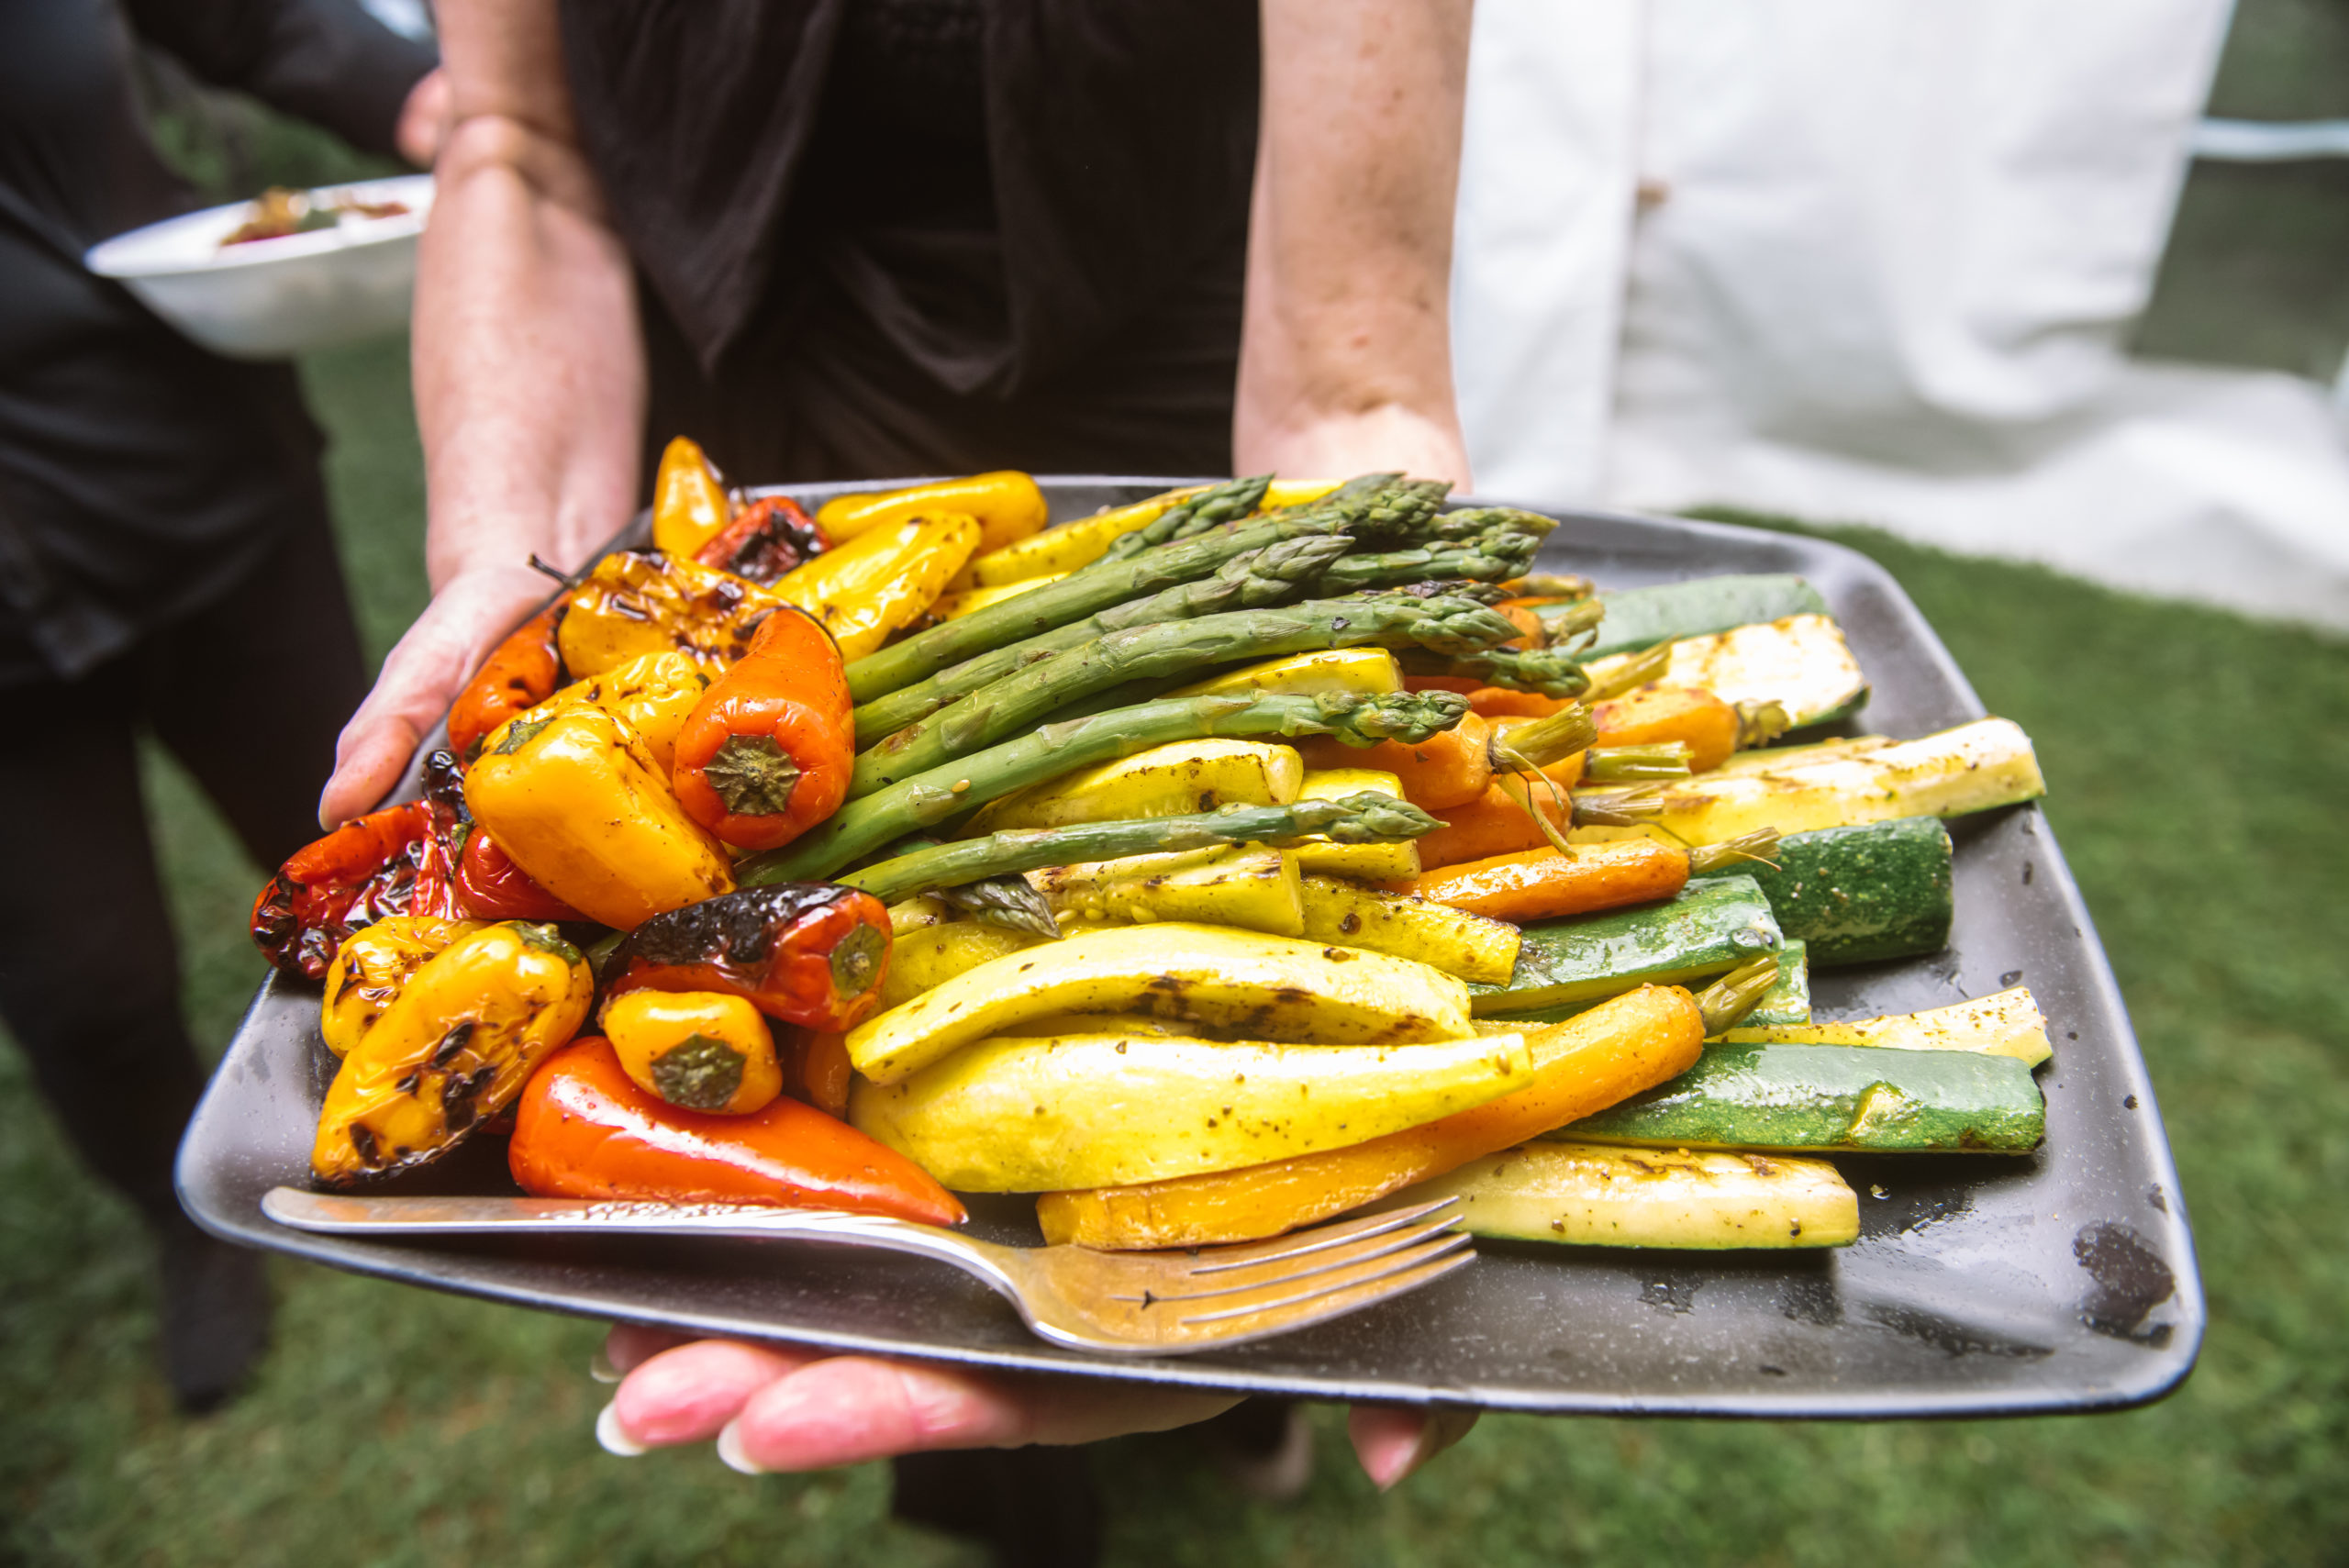 Server holding up a black family-style serving tray with lots of roasted vegetables including peppers, asparagus, zucchini, carrots, and squash. There is a silver fork laid on the tray.